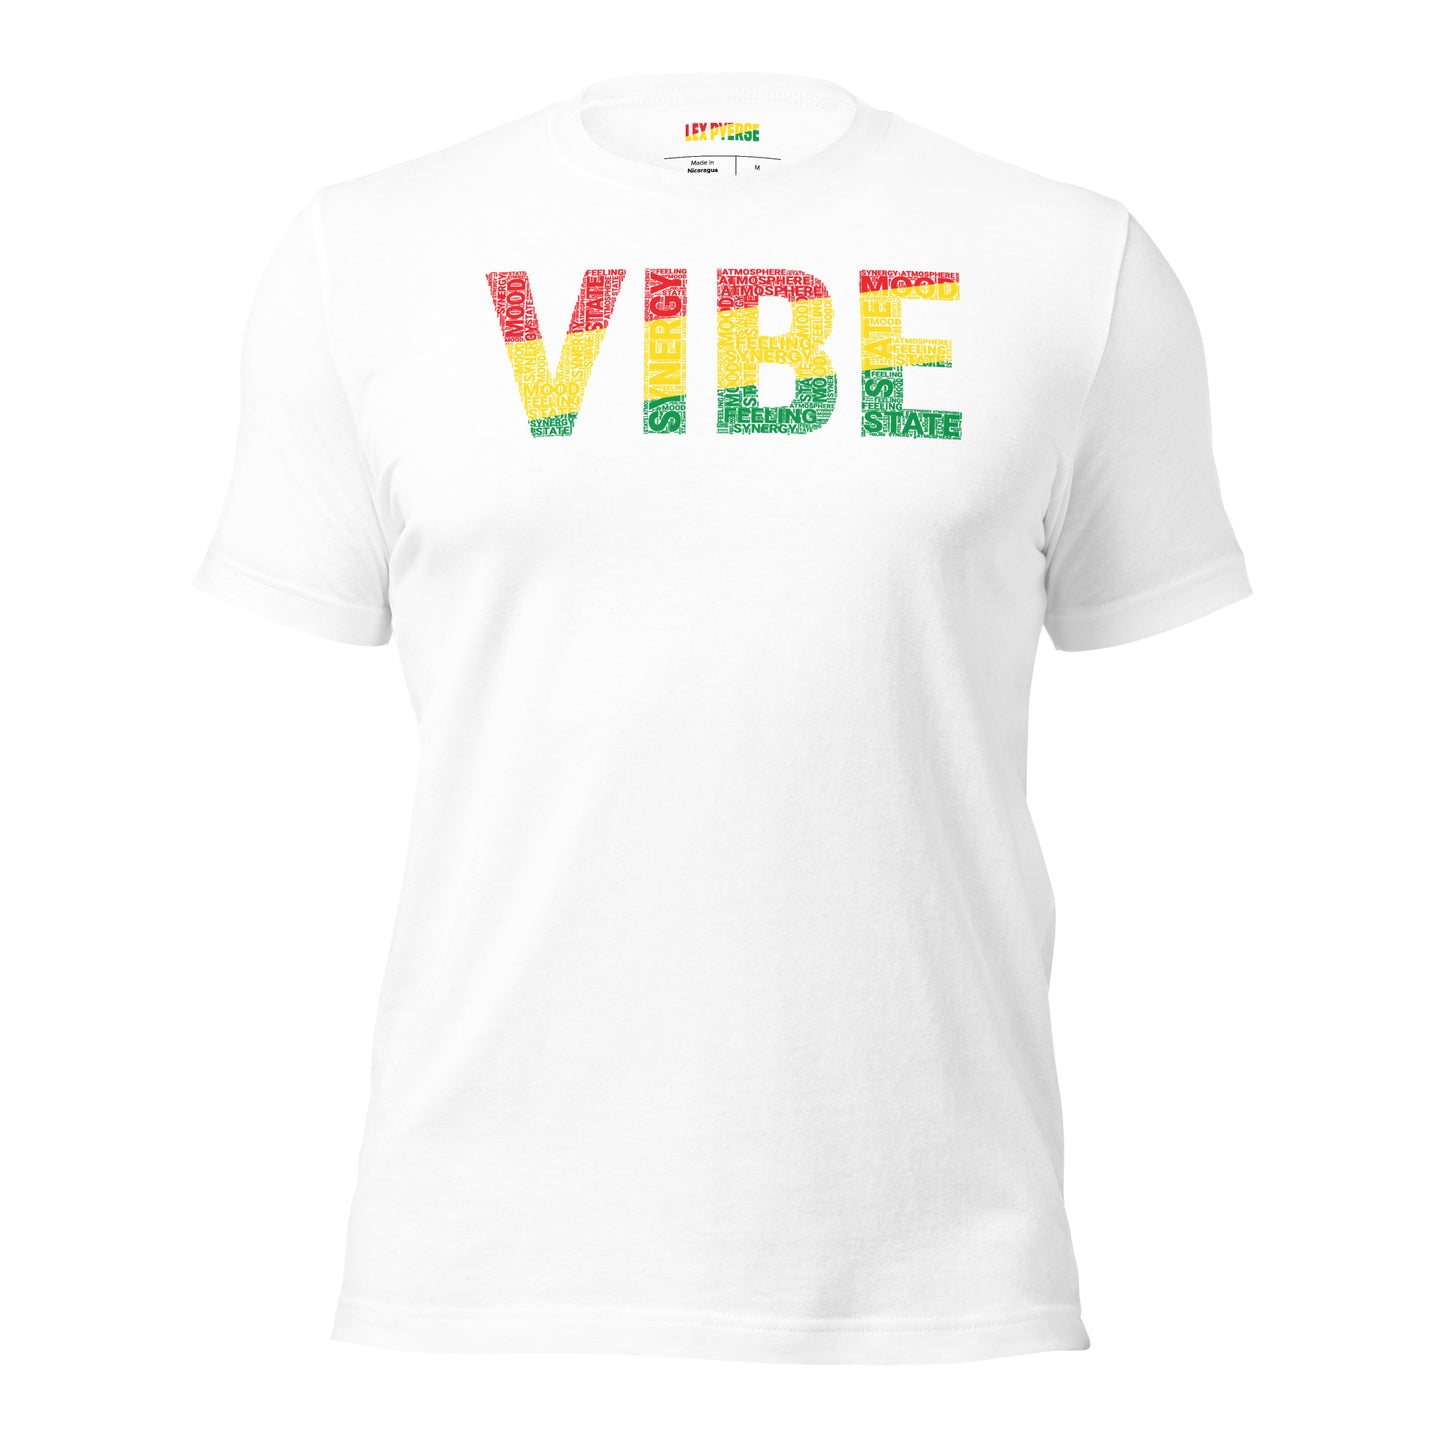 "VIBE"  Pan-African Colored Word Cluster Short-Sleeve Unisex T-Shirt